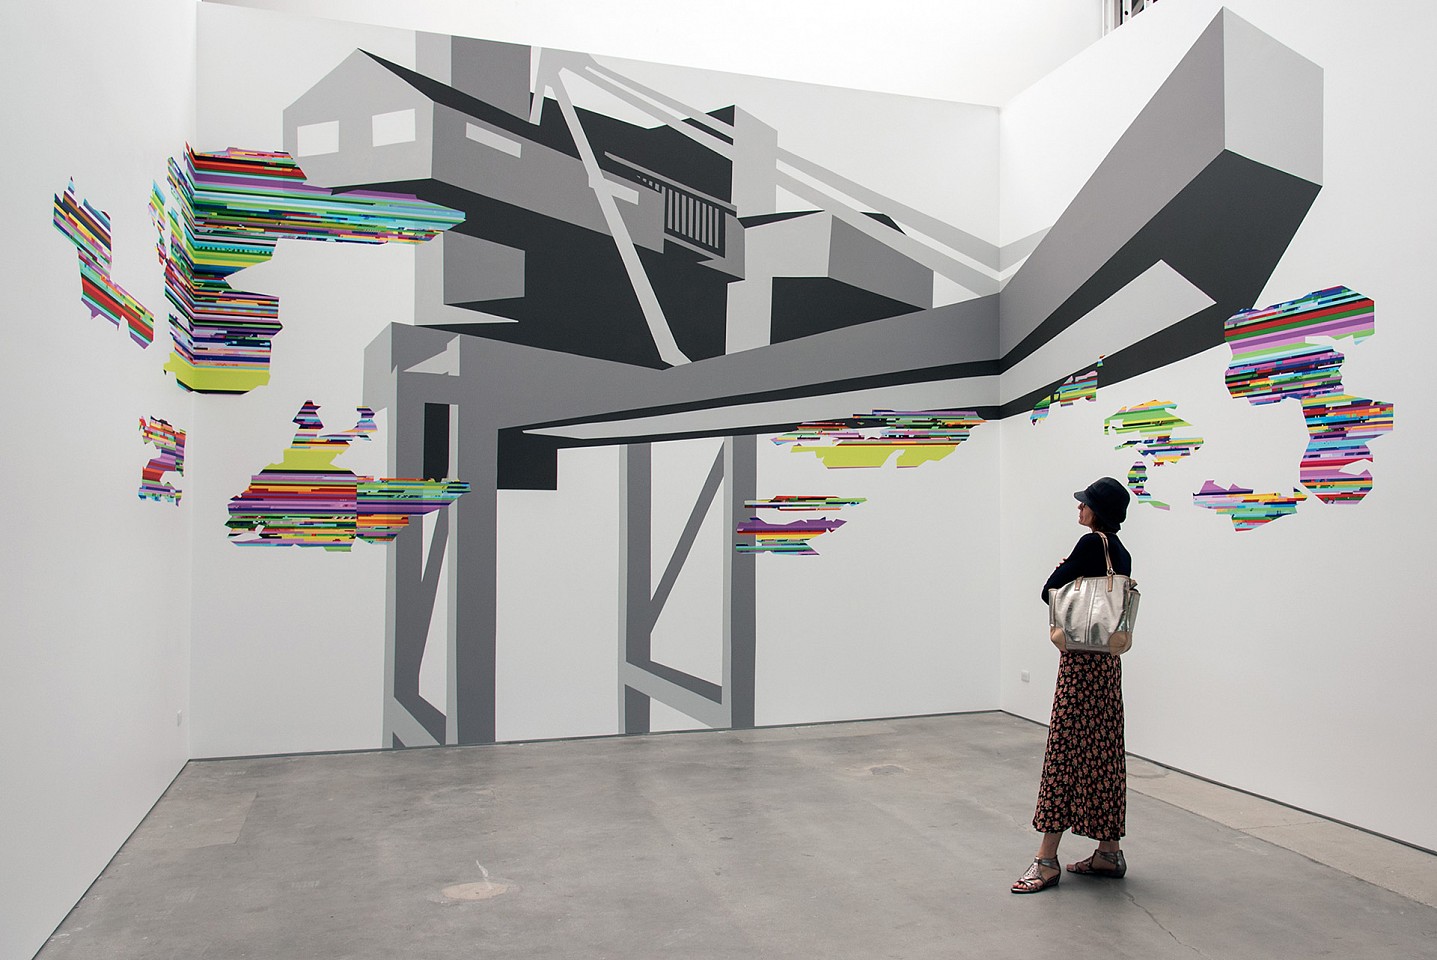 Joelle Dietrick
Cargomobilities (Los Angeles), 2015
House paint and printed terylene on three walls at Art Center College of Design, 40 x 60 feet